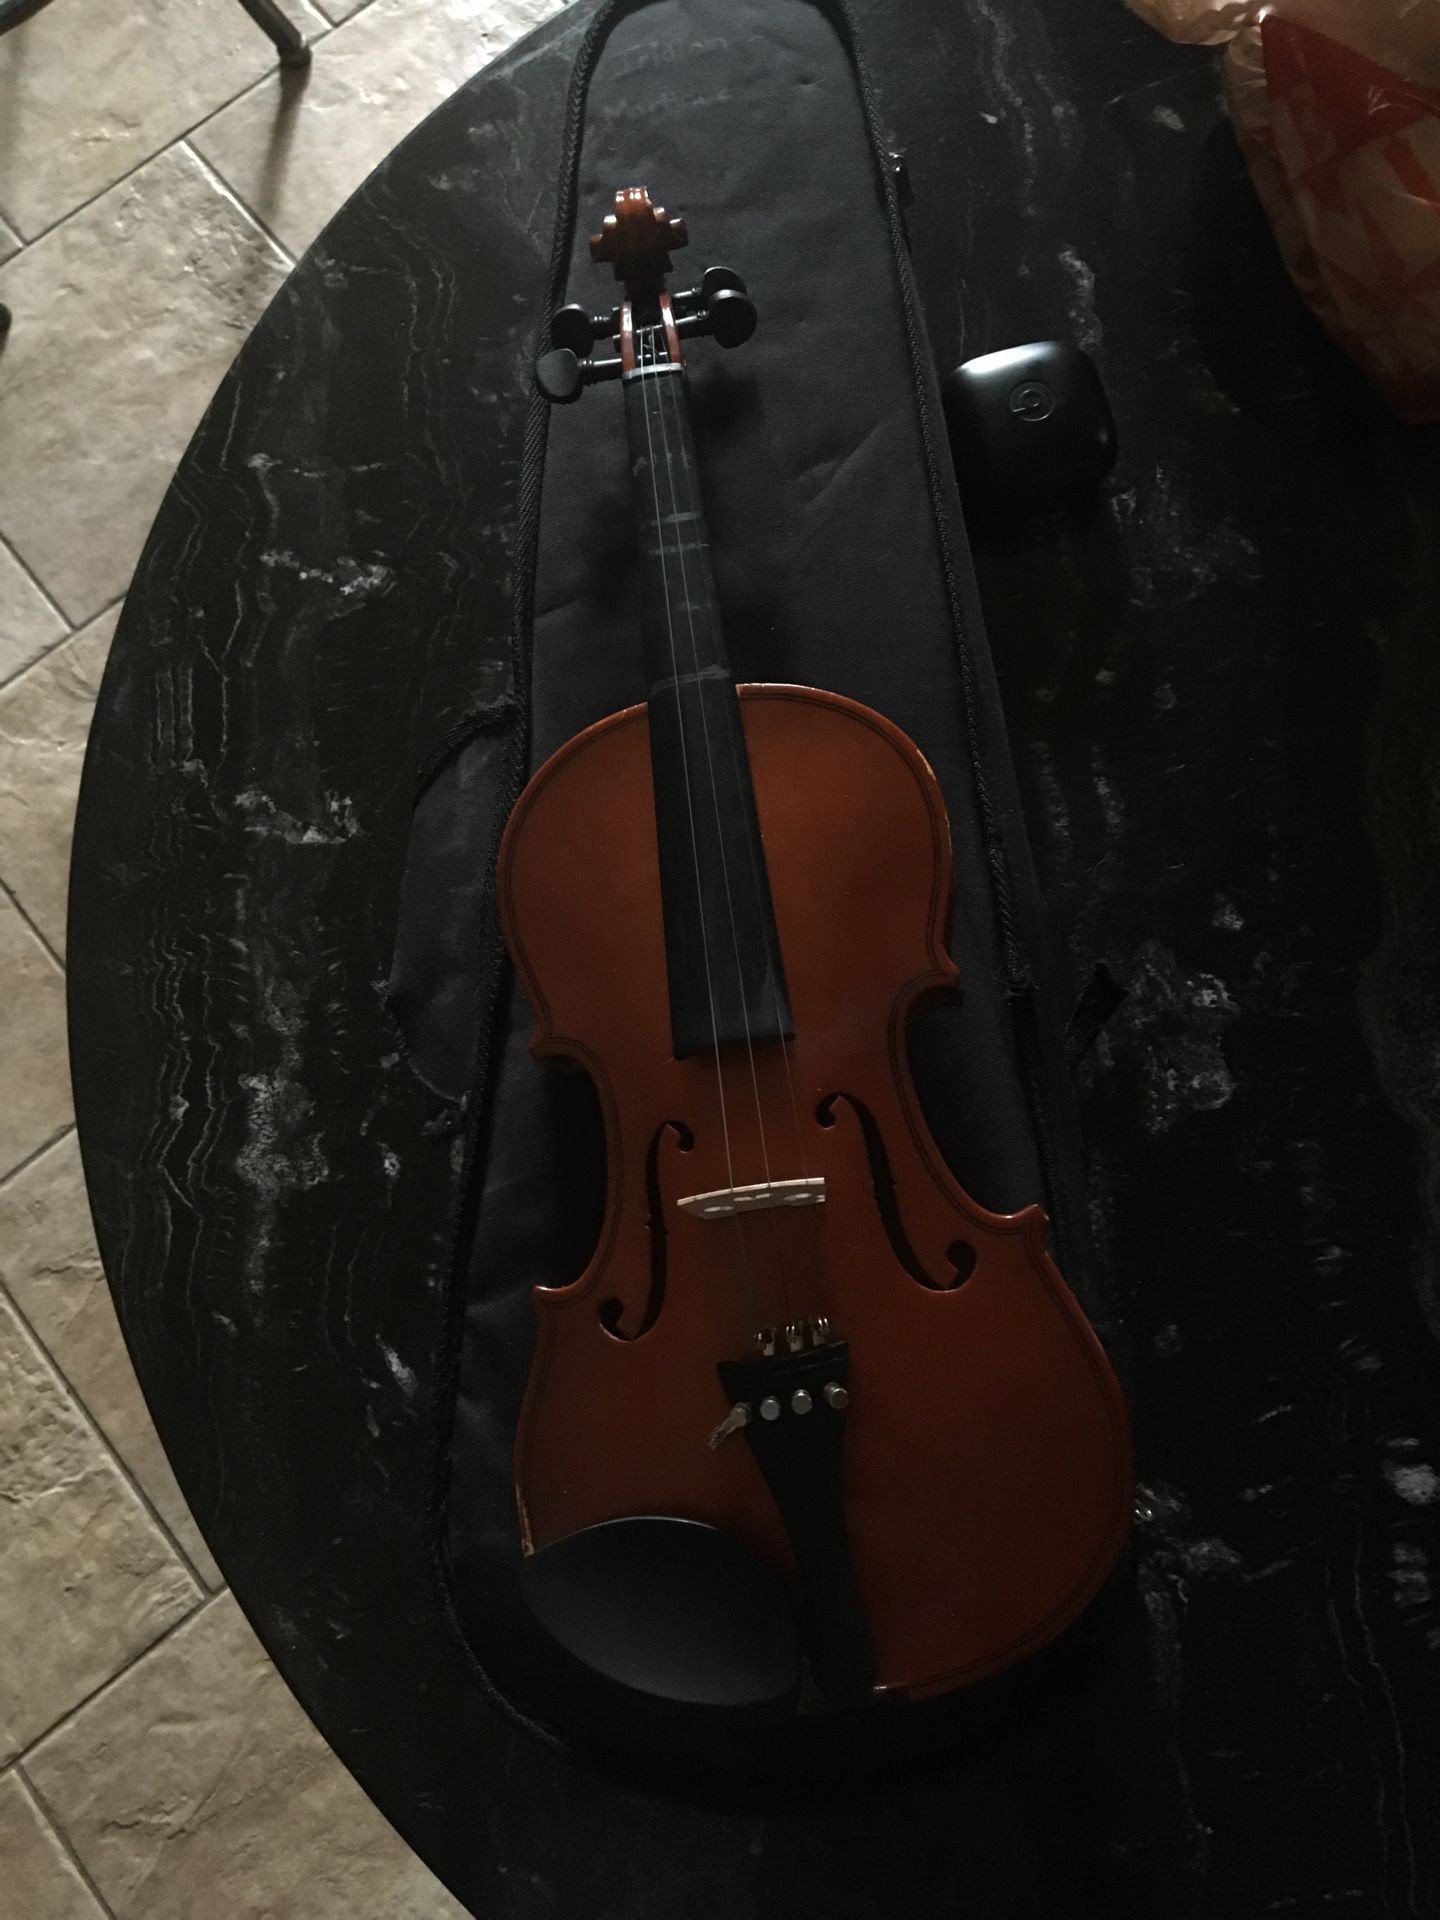 4/4 Size Student Violin w/ bow and extra tail piece and bridge